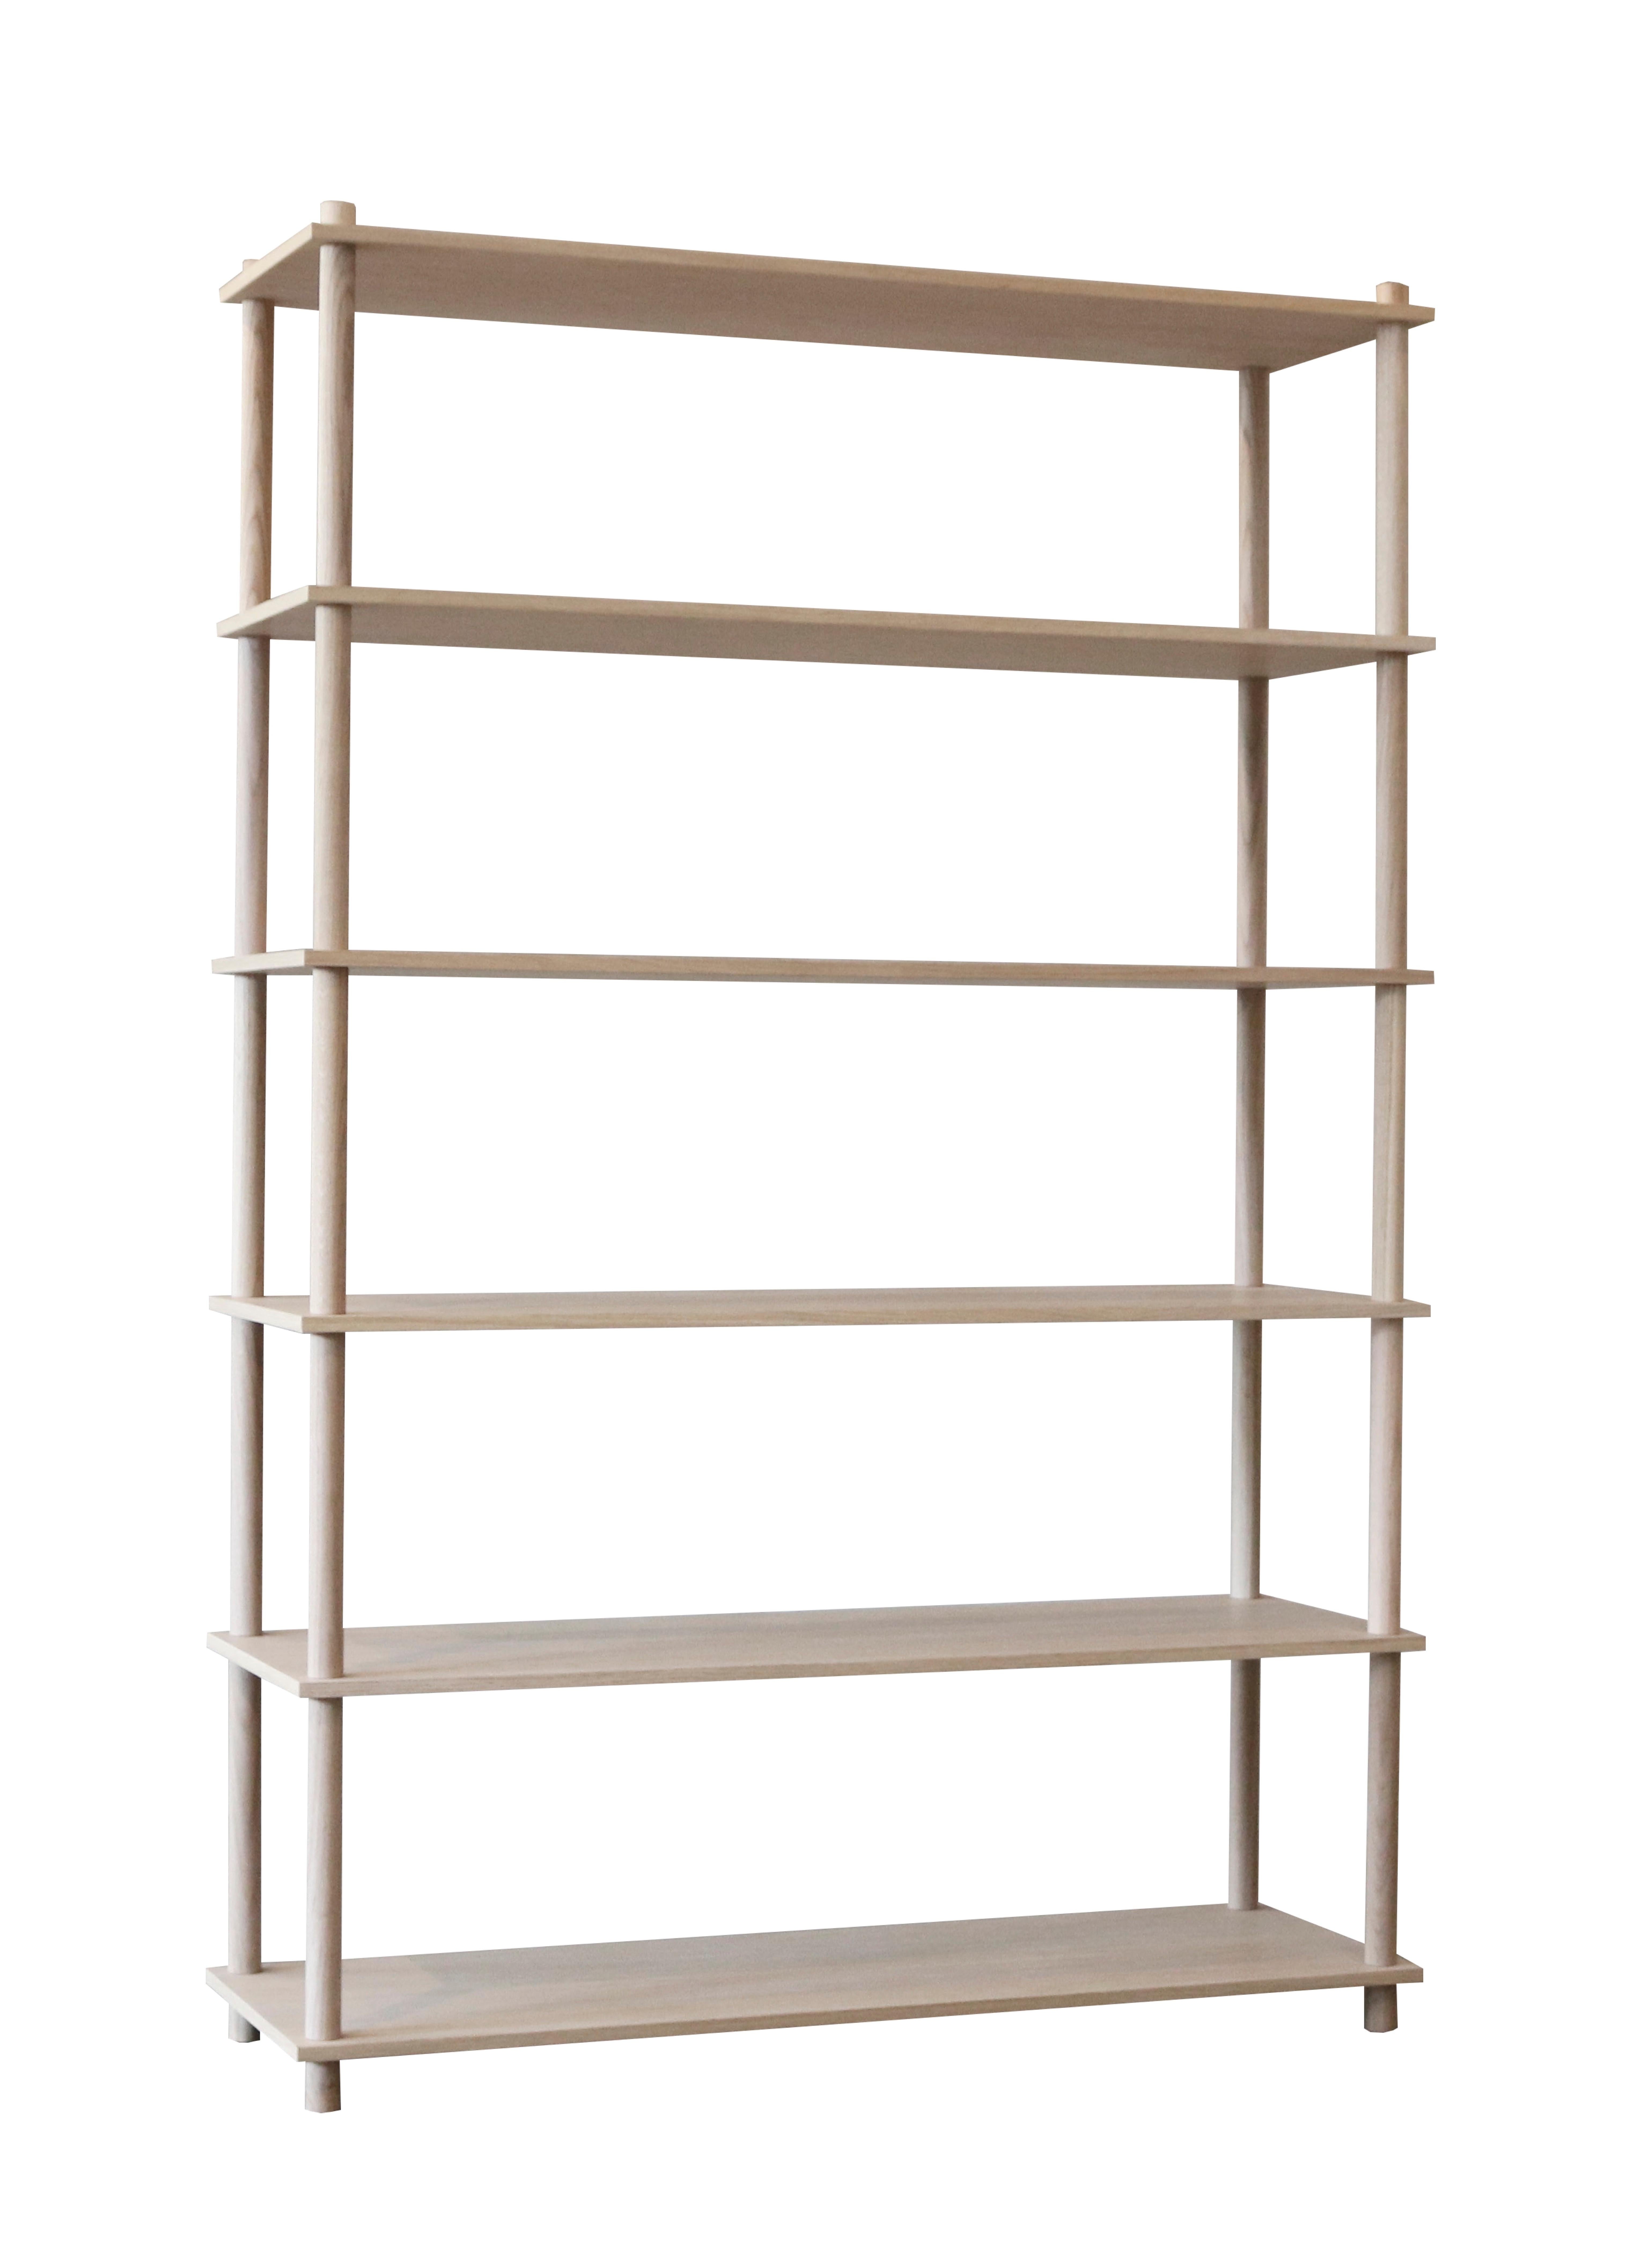 Oak elevate shelving VI by Camilla Akersveen and Christopher Konings
Materials: Metal, oak.
Dimensions: D 40 x W 120 x H 182.6 cm
Available in matt lacquered oak or black oak. Different shelving sistems available.

Camilla Akersveen and